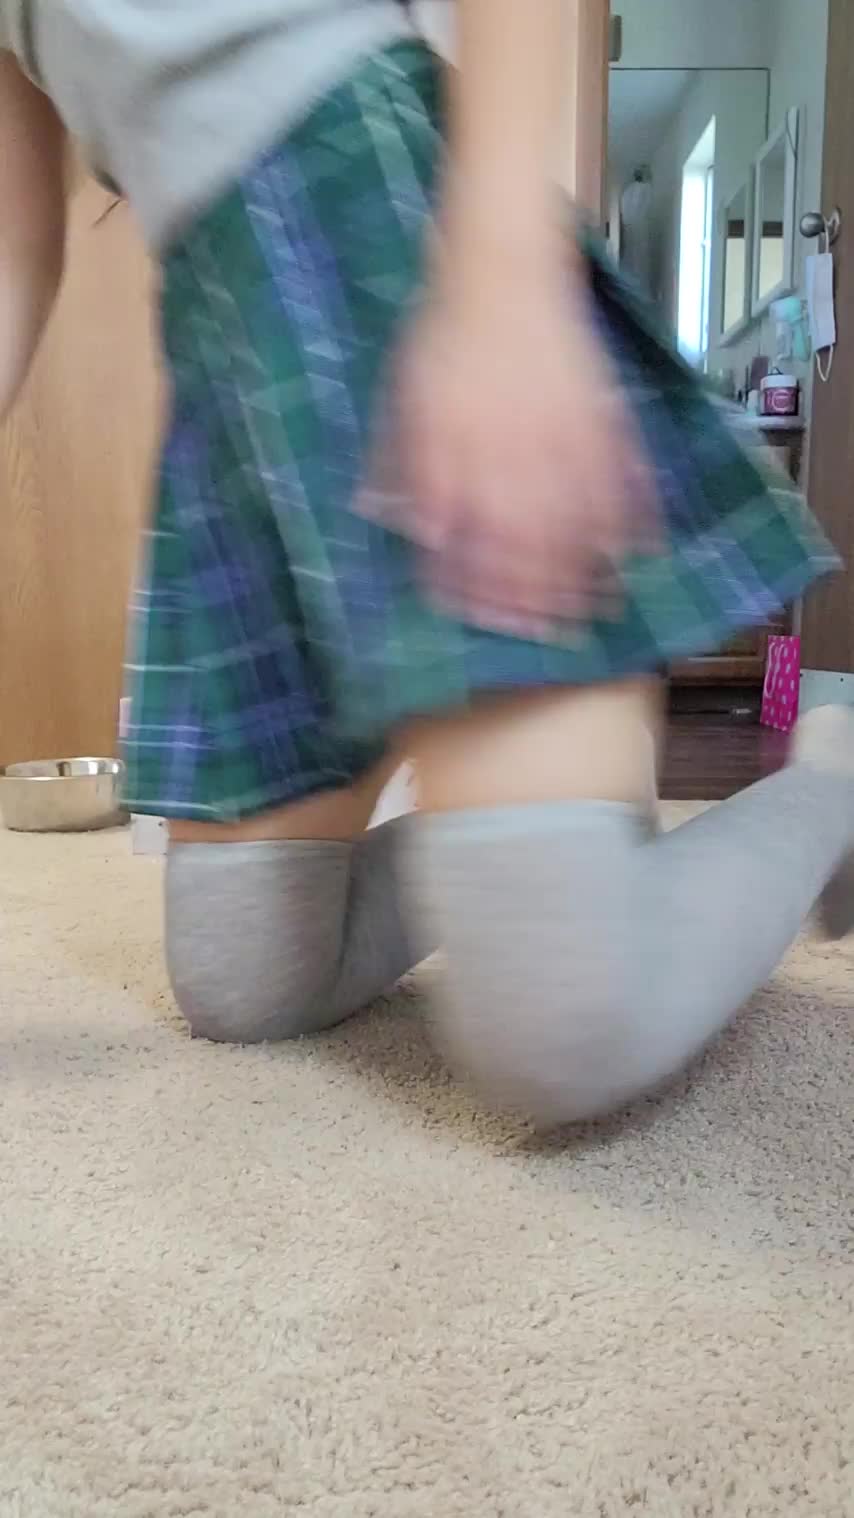 Let me give you a peek up my skirt 🥰 : video clip